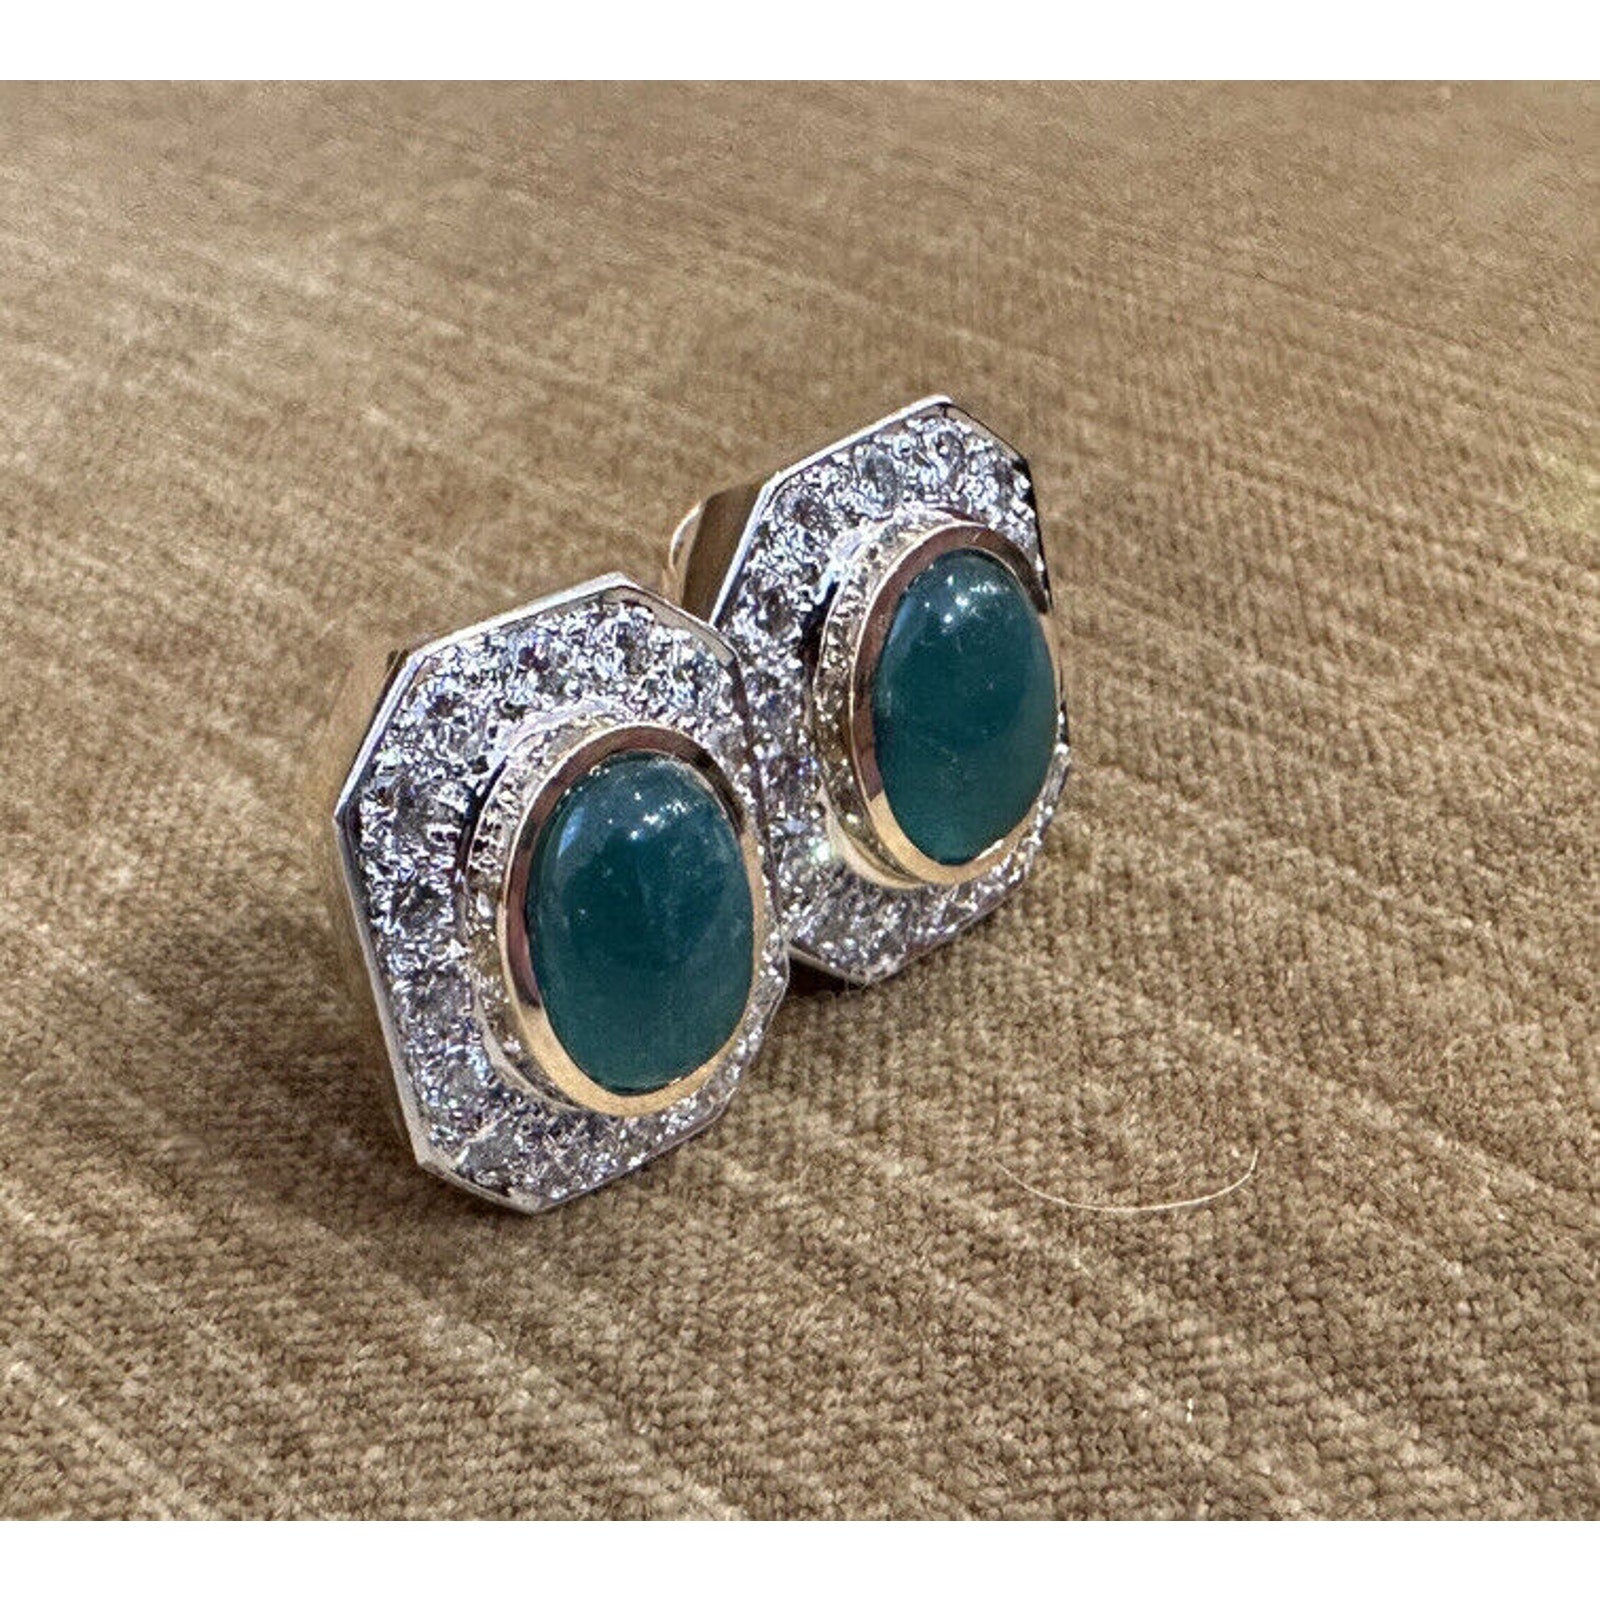 Emerald Cabochon & Diamond Statement Earrings in 18k Yellow Gold - HM2528A